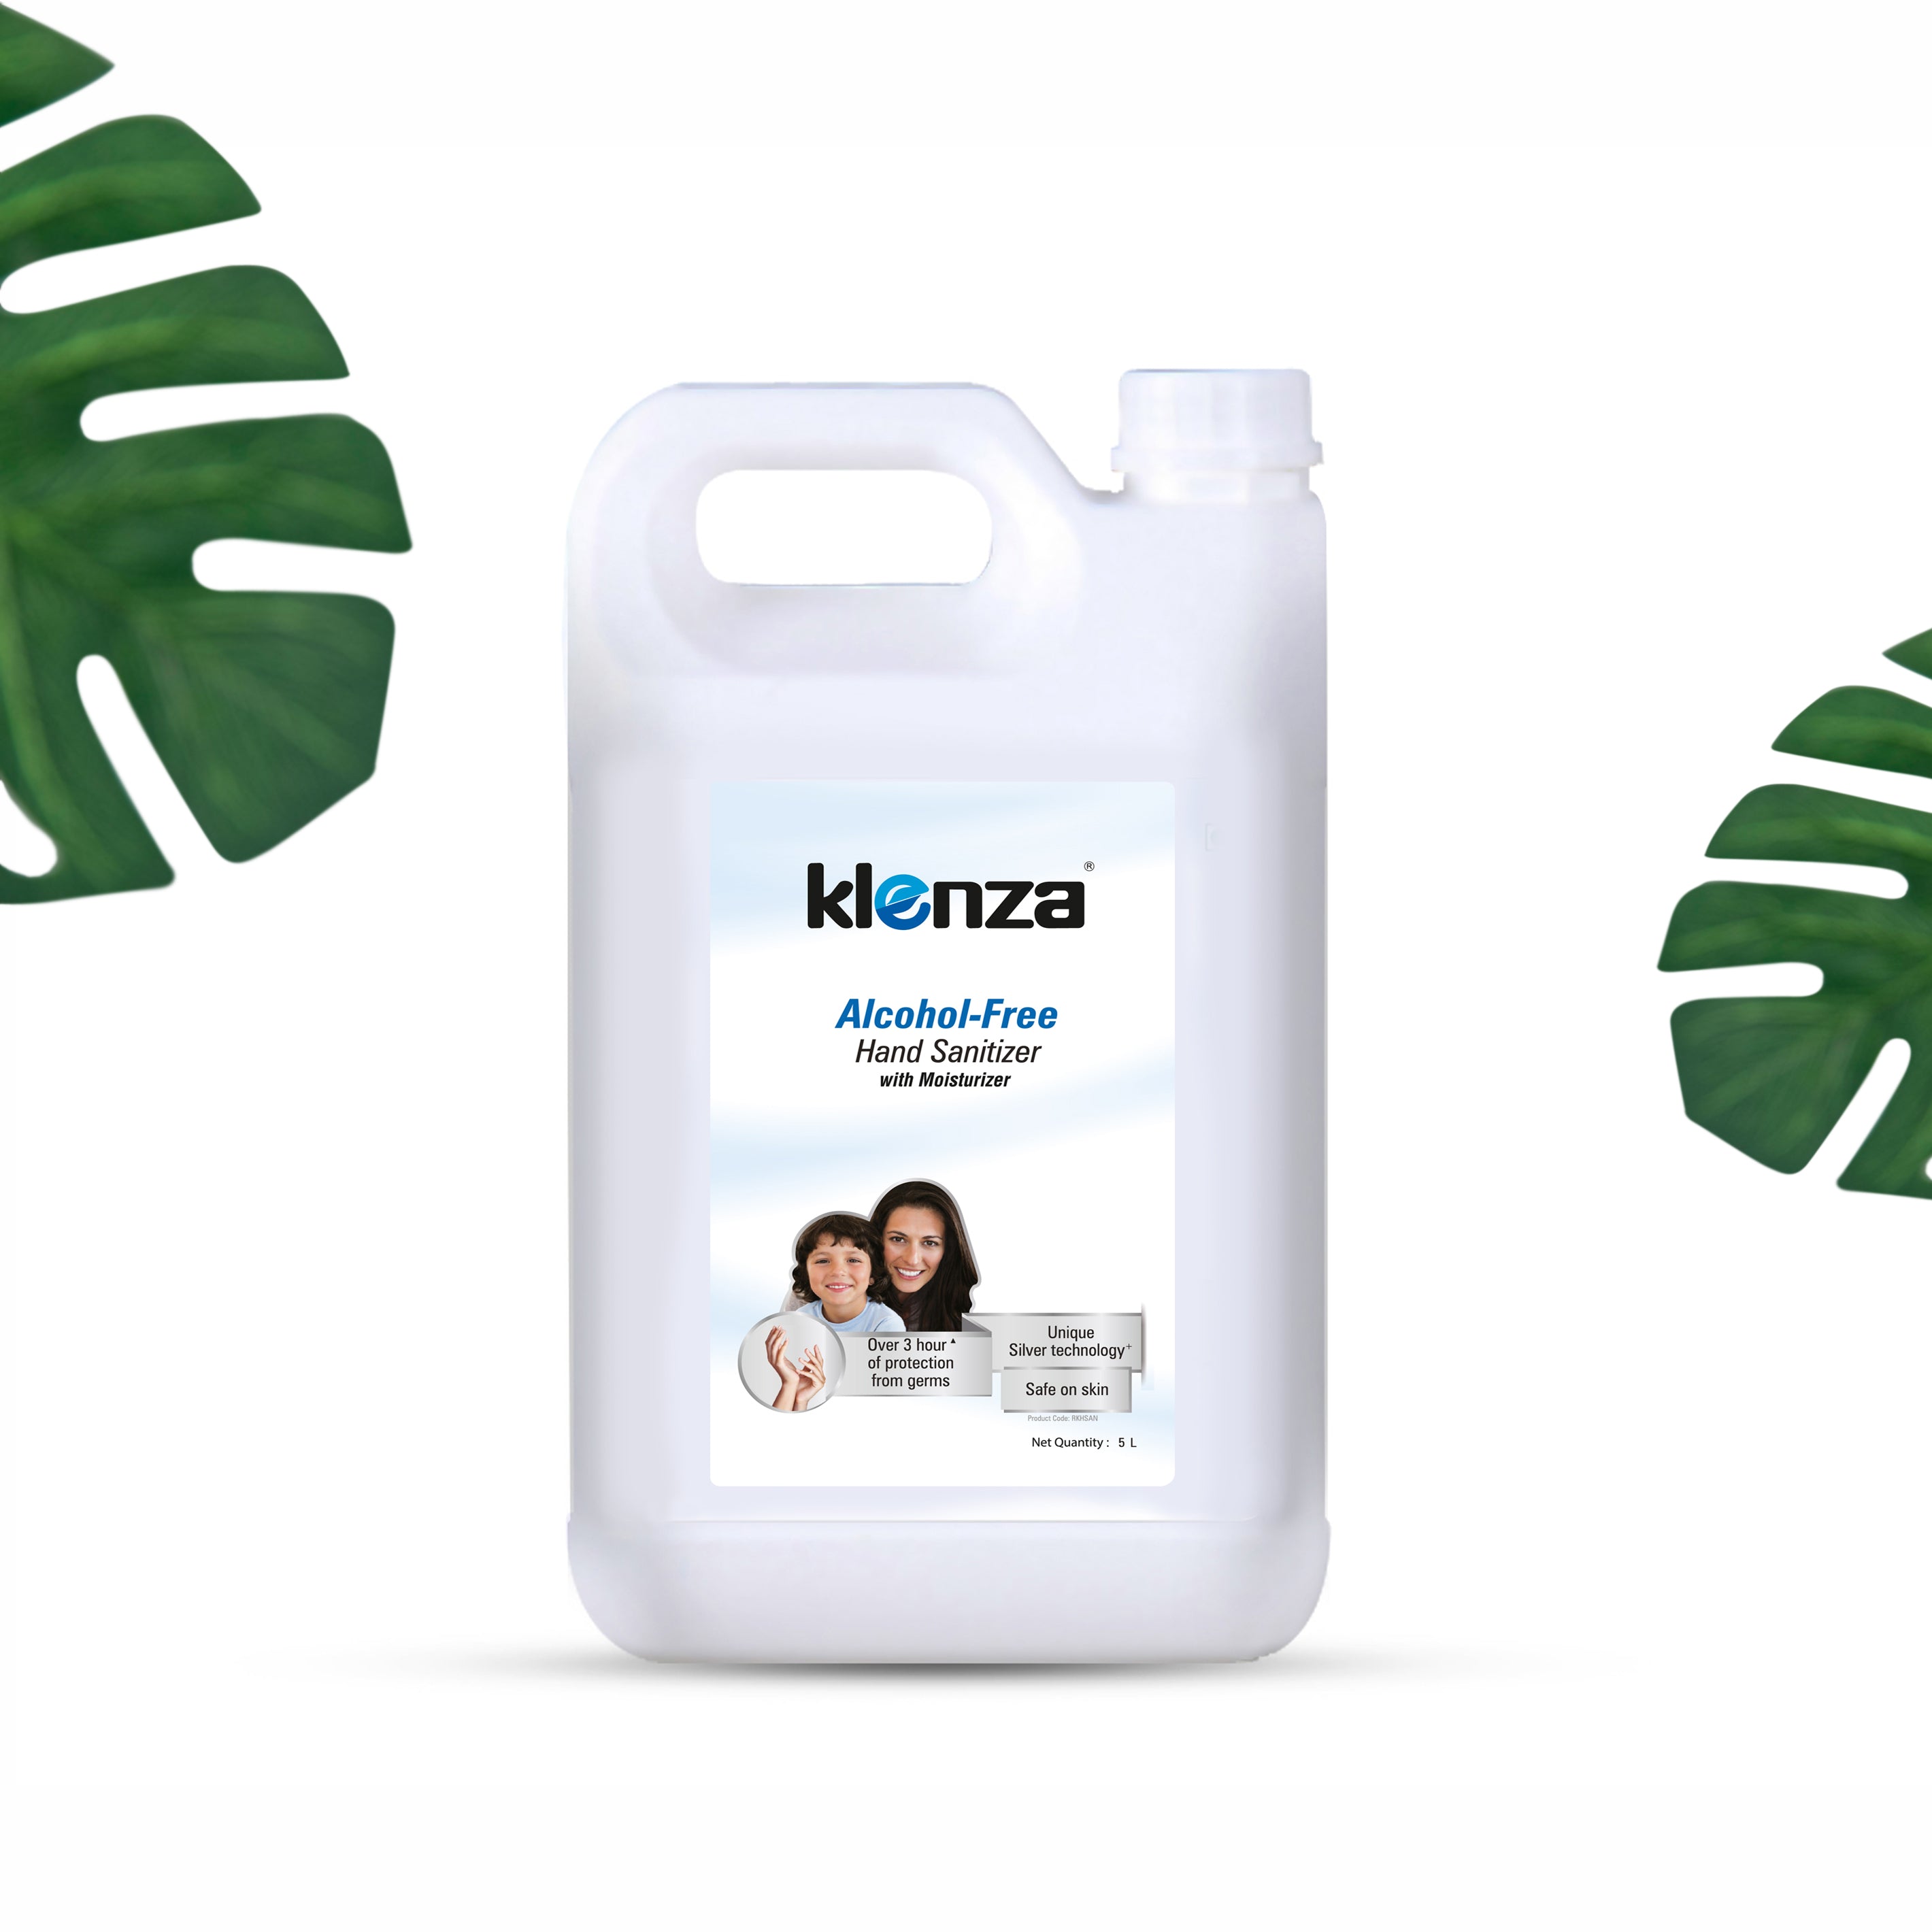 Klenza Alcohol-Free Hand Sanitizer 5L Refill Can